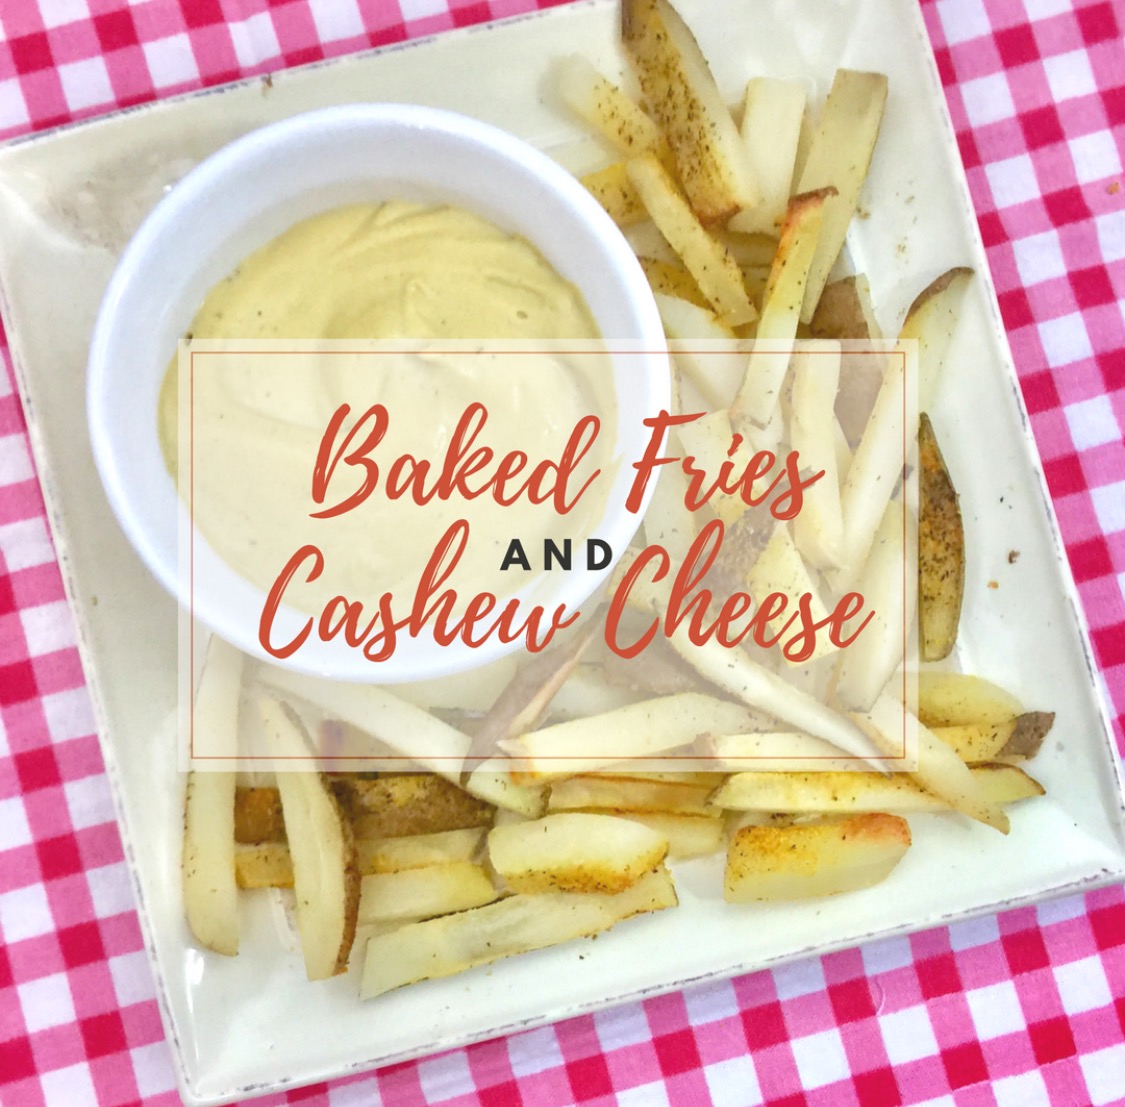 Baked Fries & Cashew Cheese